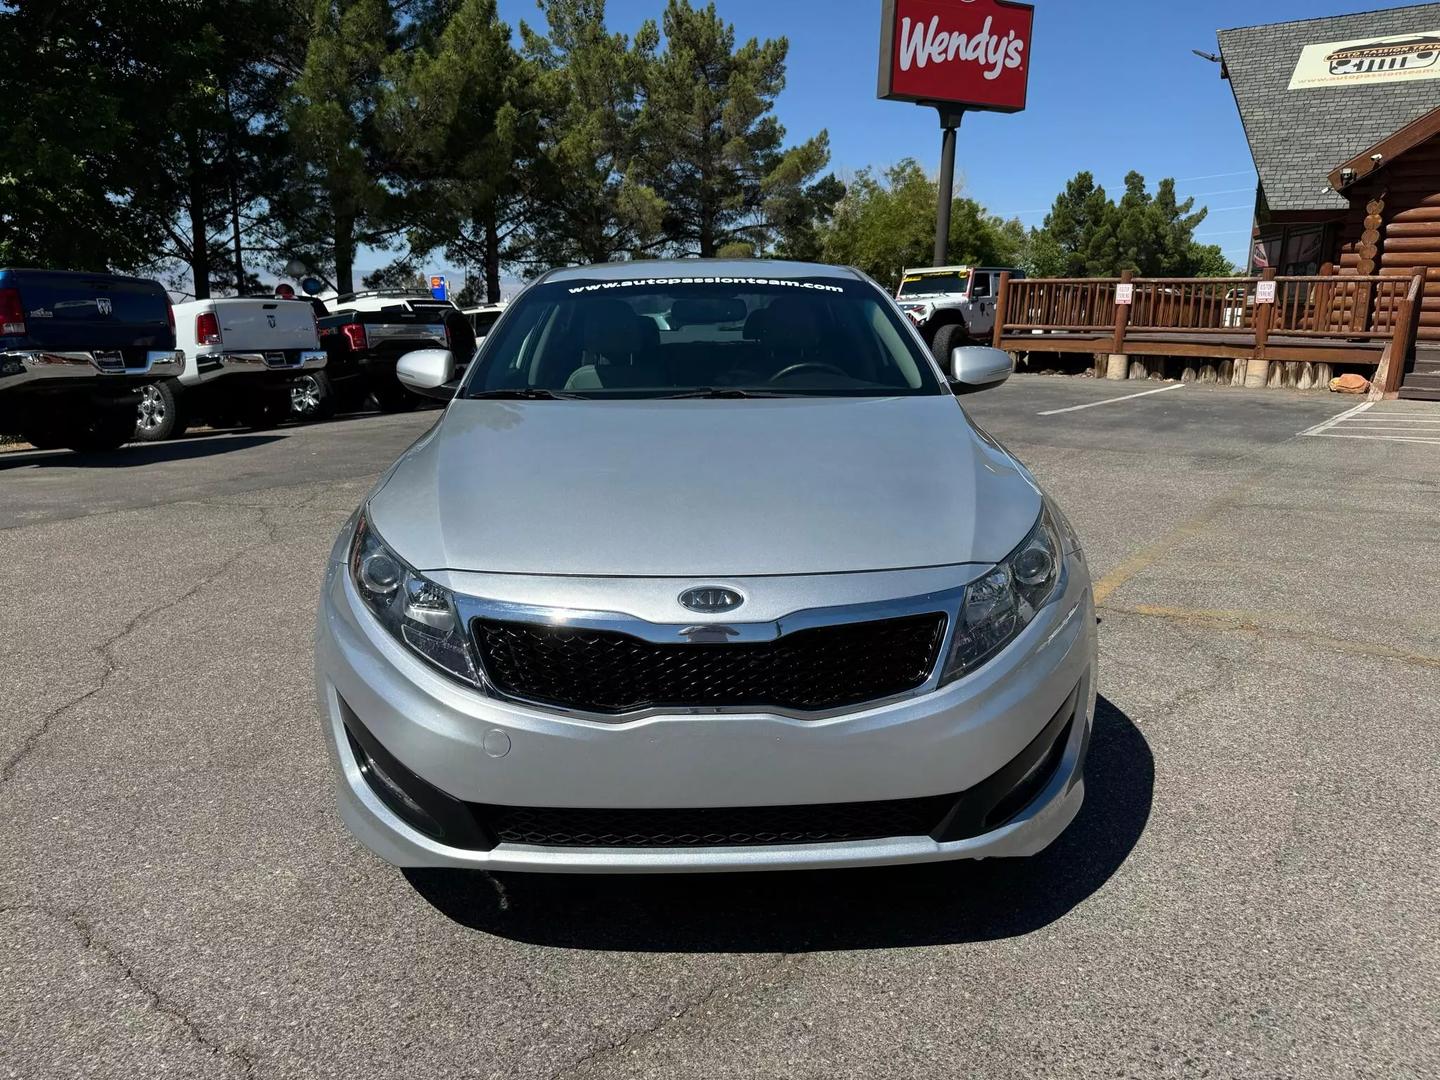 Used 2012 Kia Optima EX with VIN 5XXGN4A73CG081033 for sale in St. George, UT